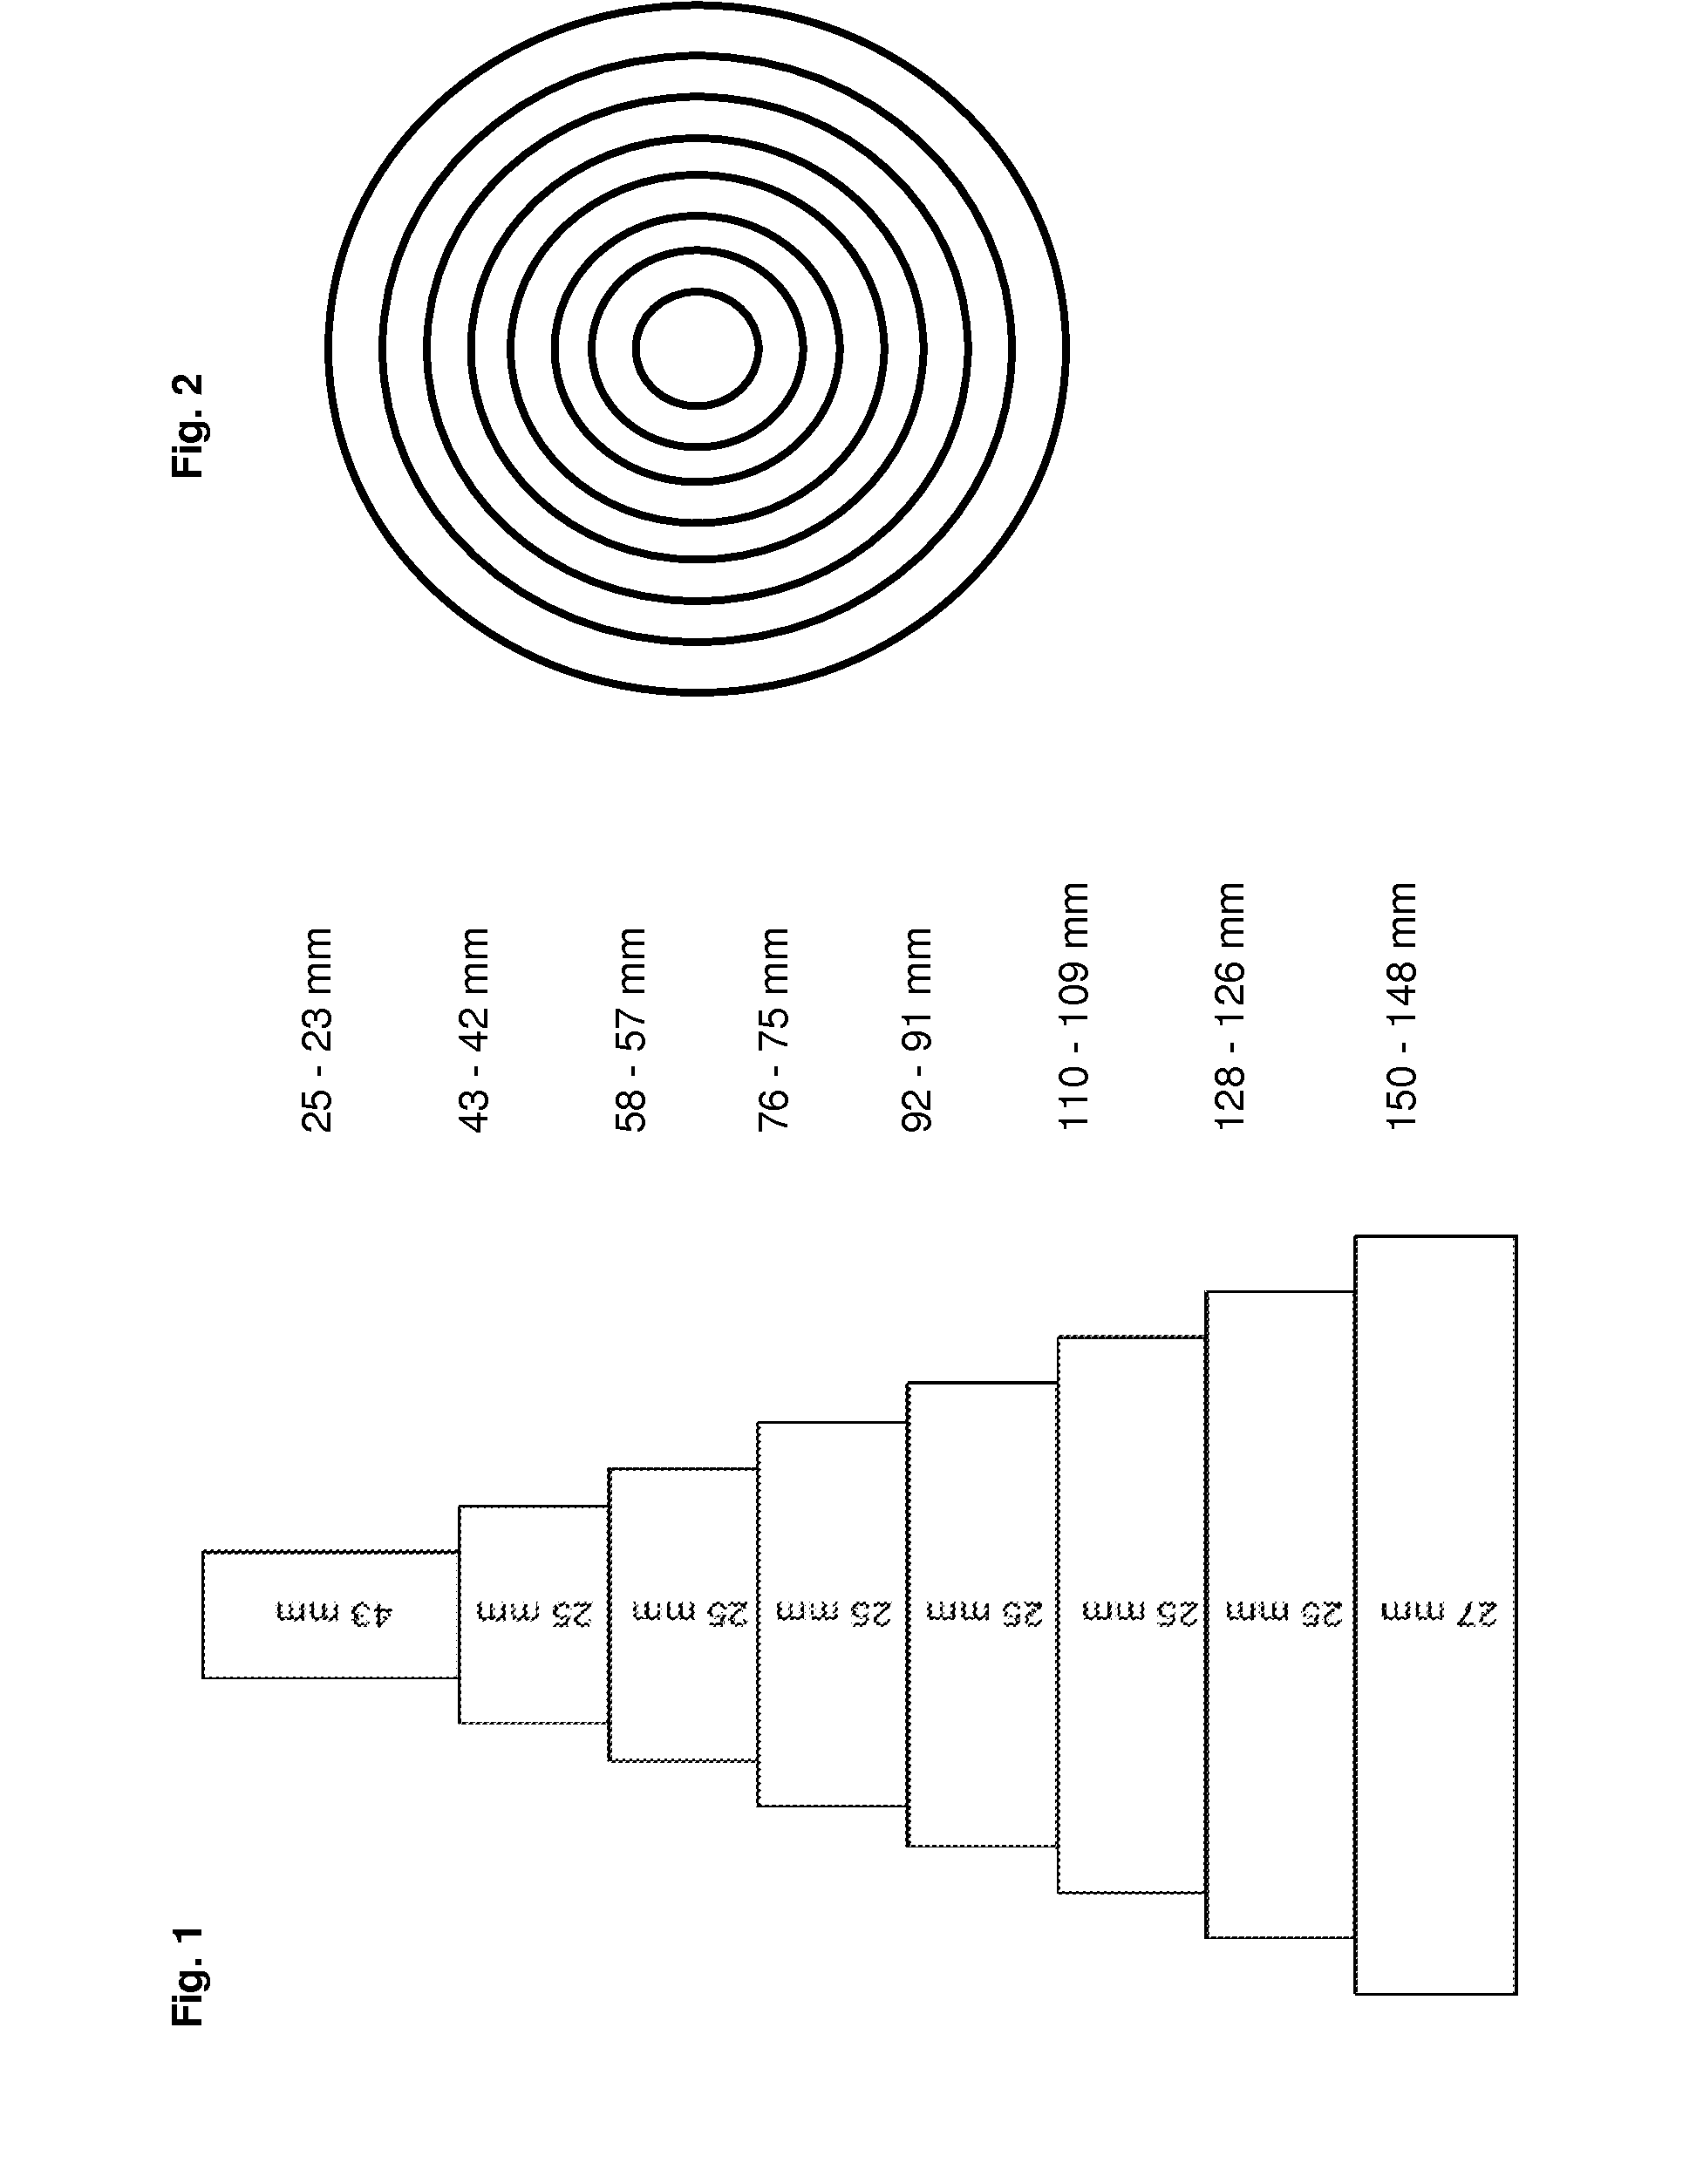 Molding material mixtures containing metal oxides of aluminum and zirconium in particulate form